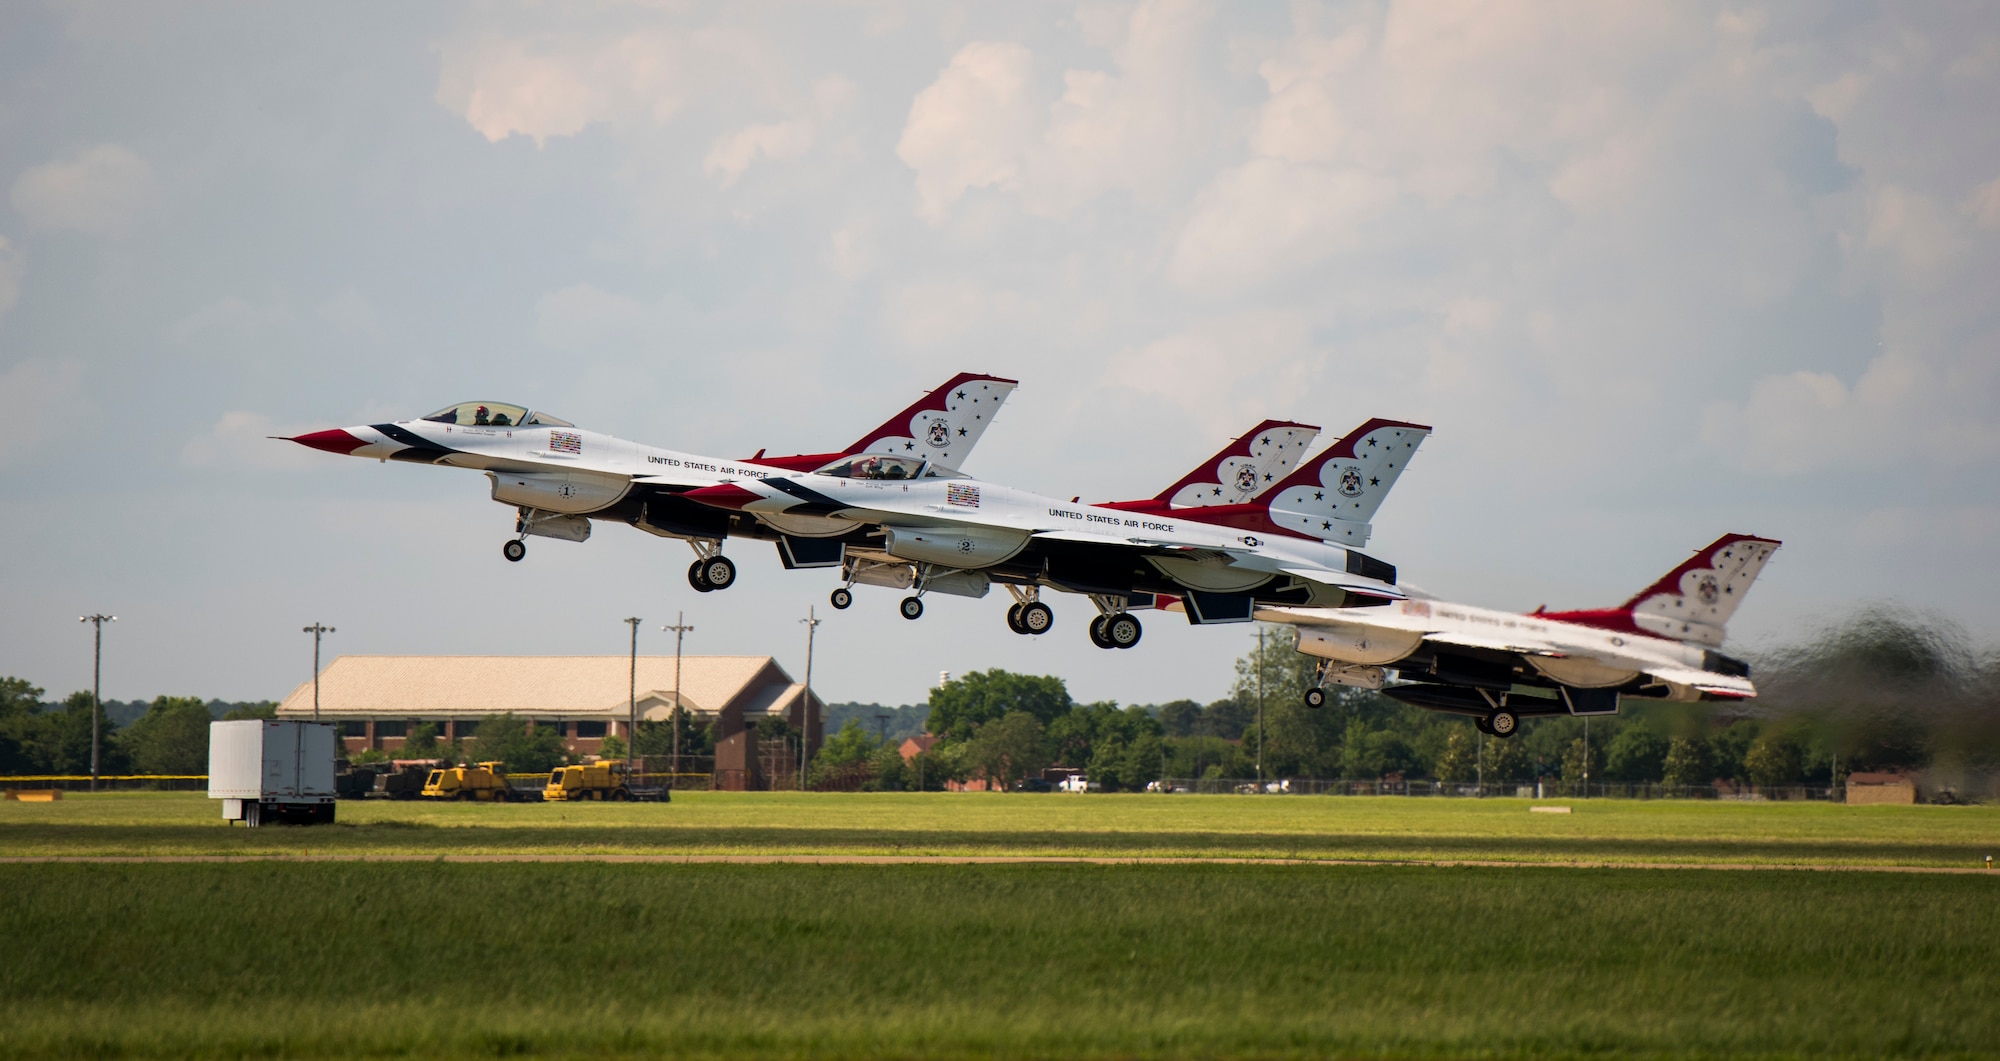 The U.S. Air Force Thunderbirds take off during Airpower Over Hampton Roads JBLE Air and Space Expo at Joint Base Langley-Eustis, Virginia, May 20, 2018.